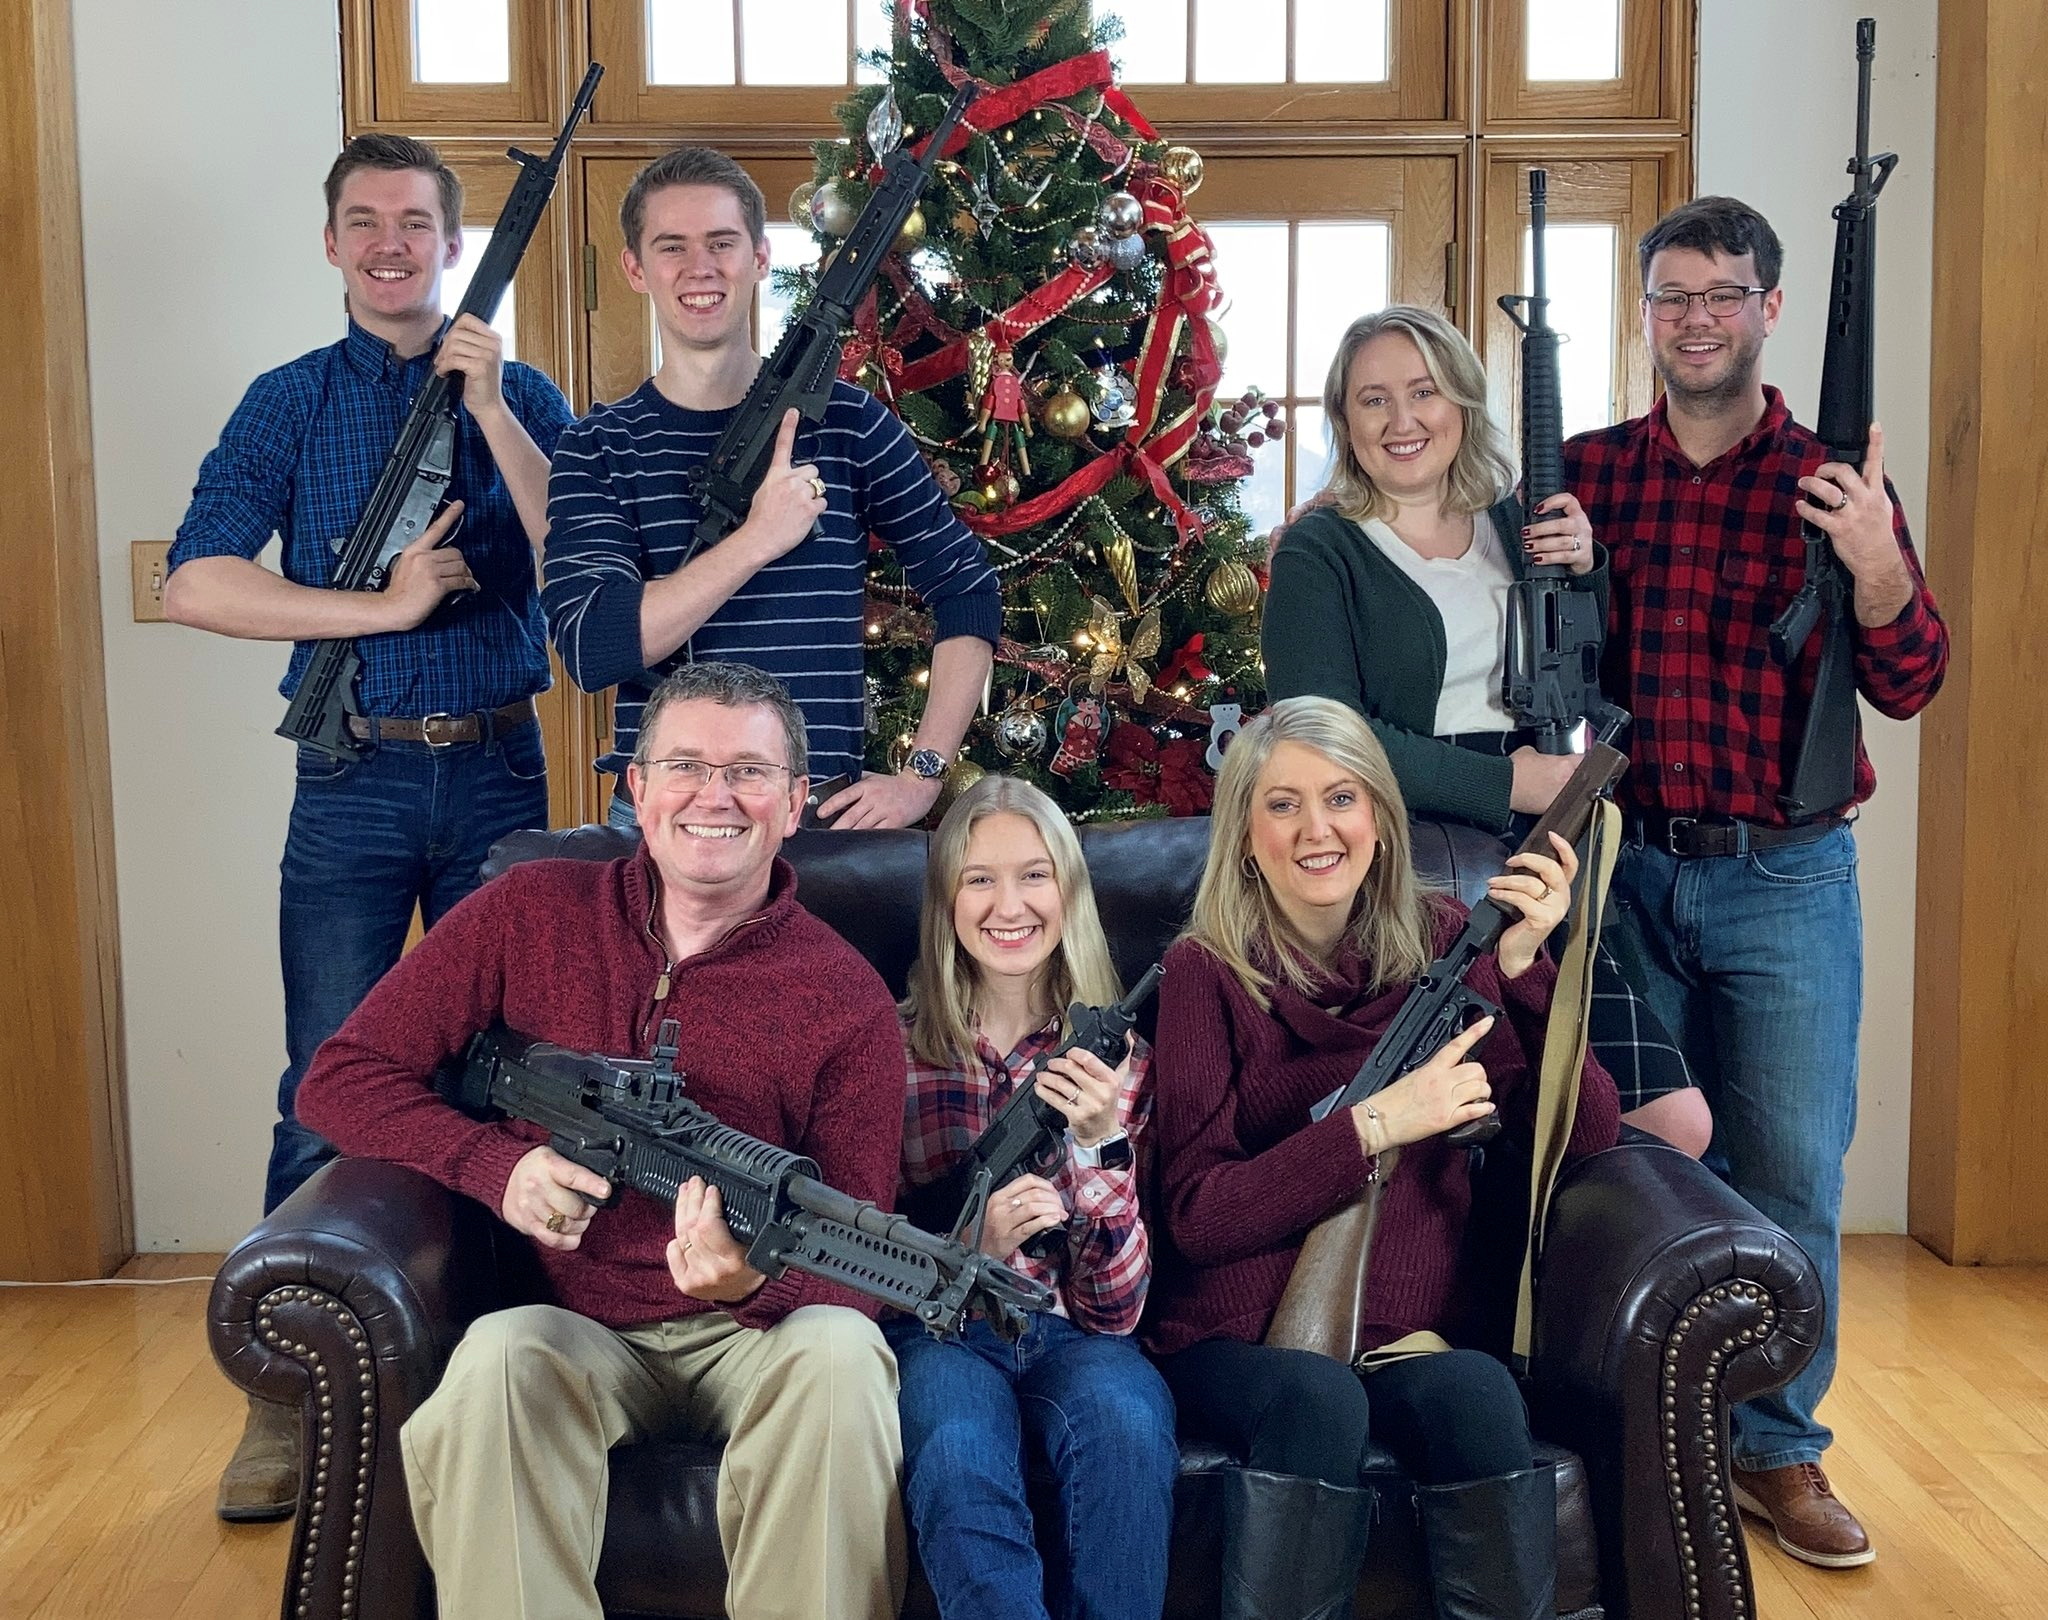 U.S. Rep. Thomas Massie (R-KY) in a Christmas photo of his family holding guns, in this image obtained from Twitter, posted on December 4, 2021. Courtesy of Twitter @REPTHOMASMASSIE / Social Media via REUTERS 